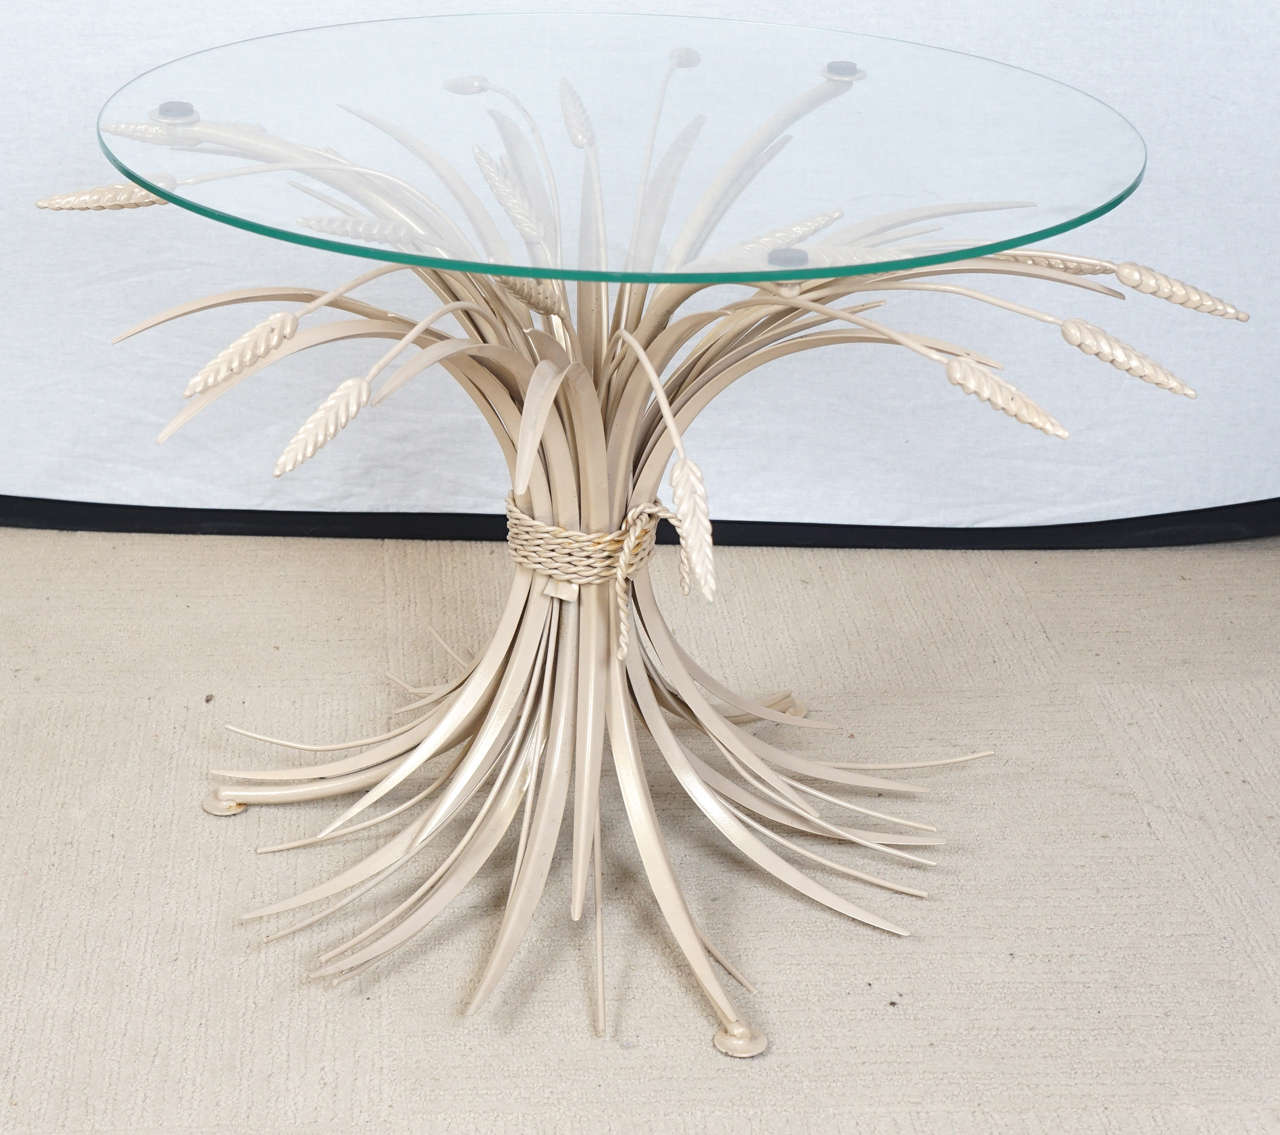 A Sheaf of Wheat style coffee table, most commonly labeled for Coco Chanel and hollywood regency from around 1962. This table is painted with a muted pale tone.